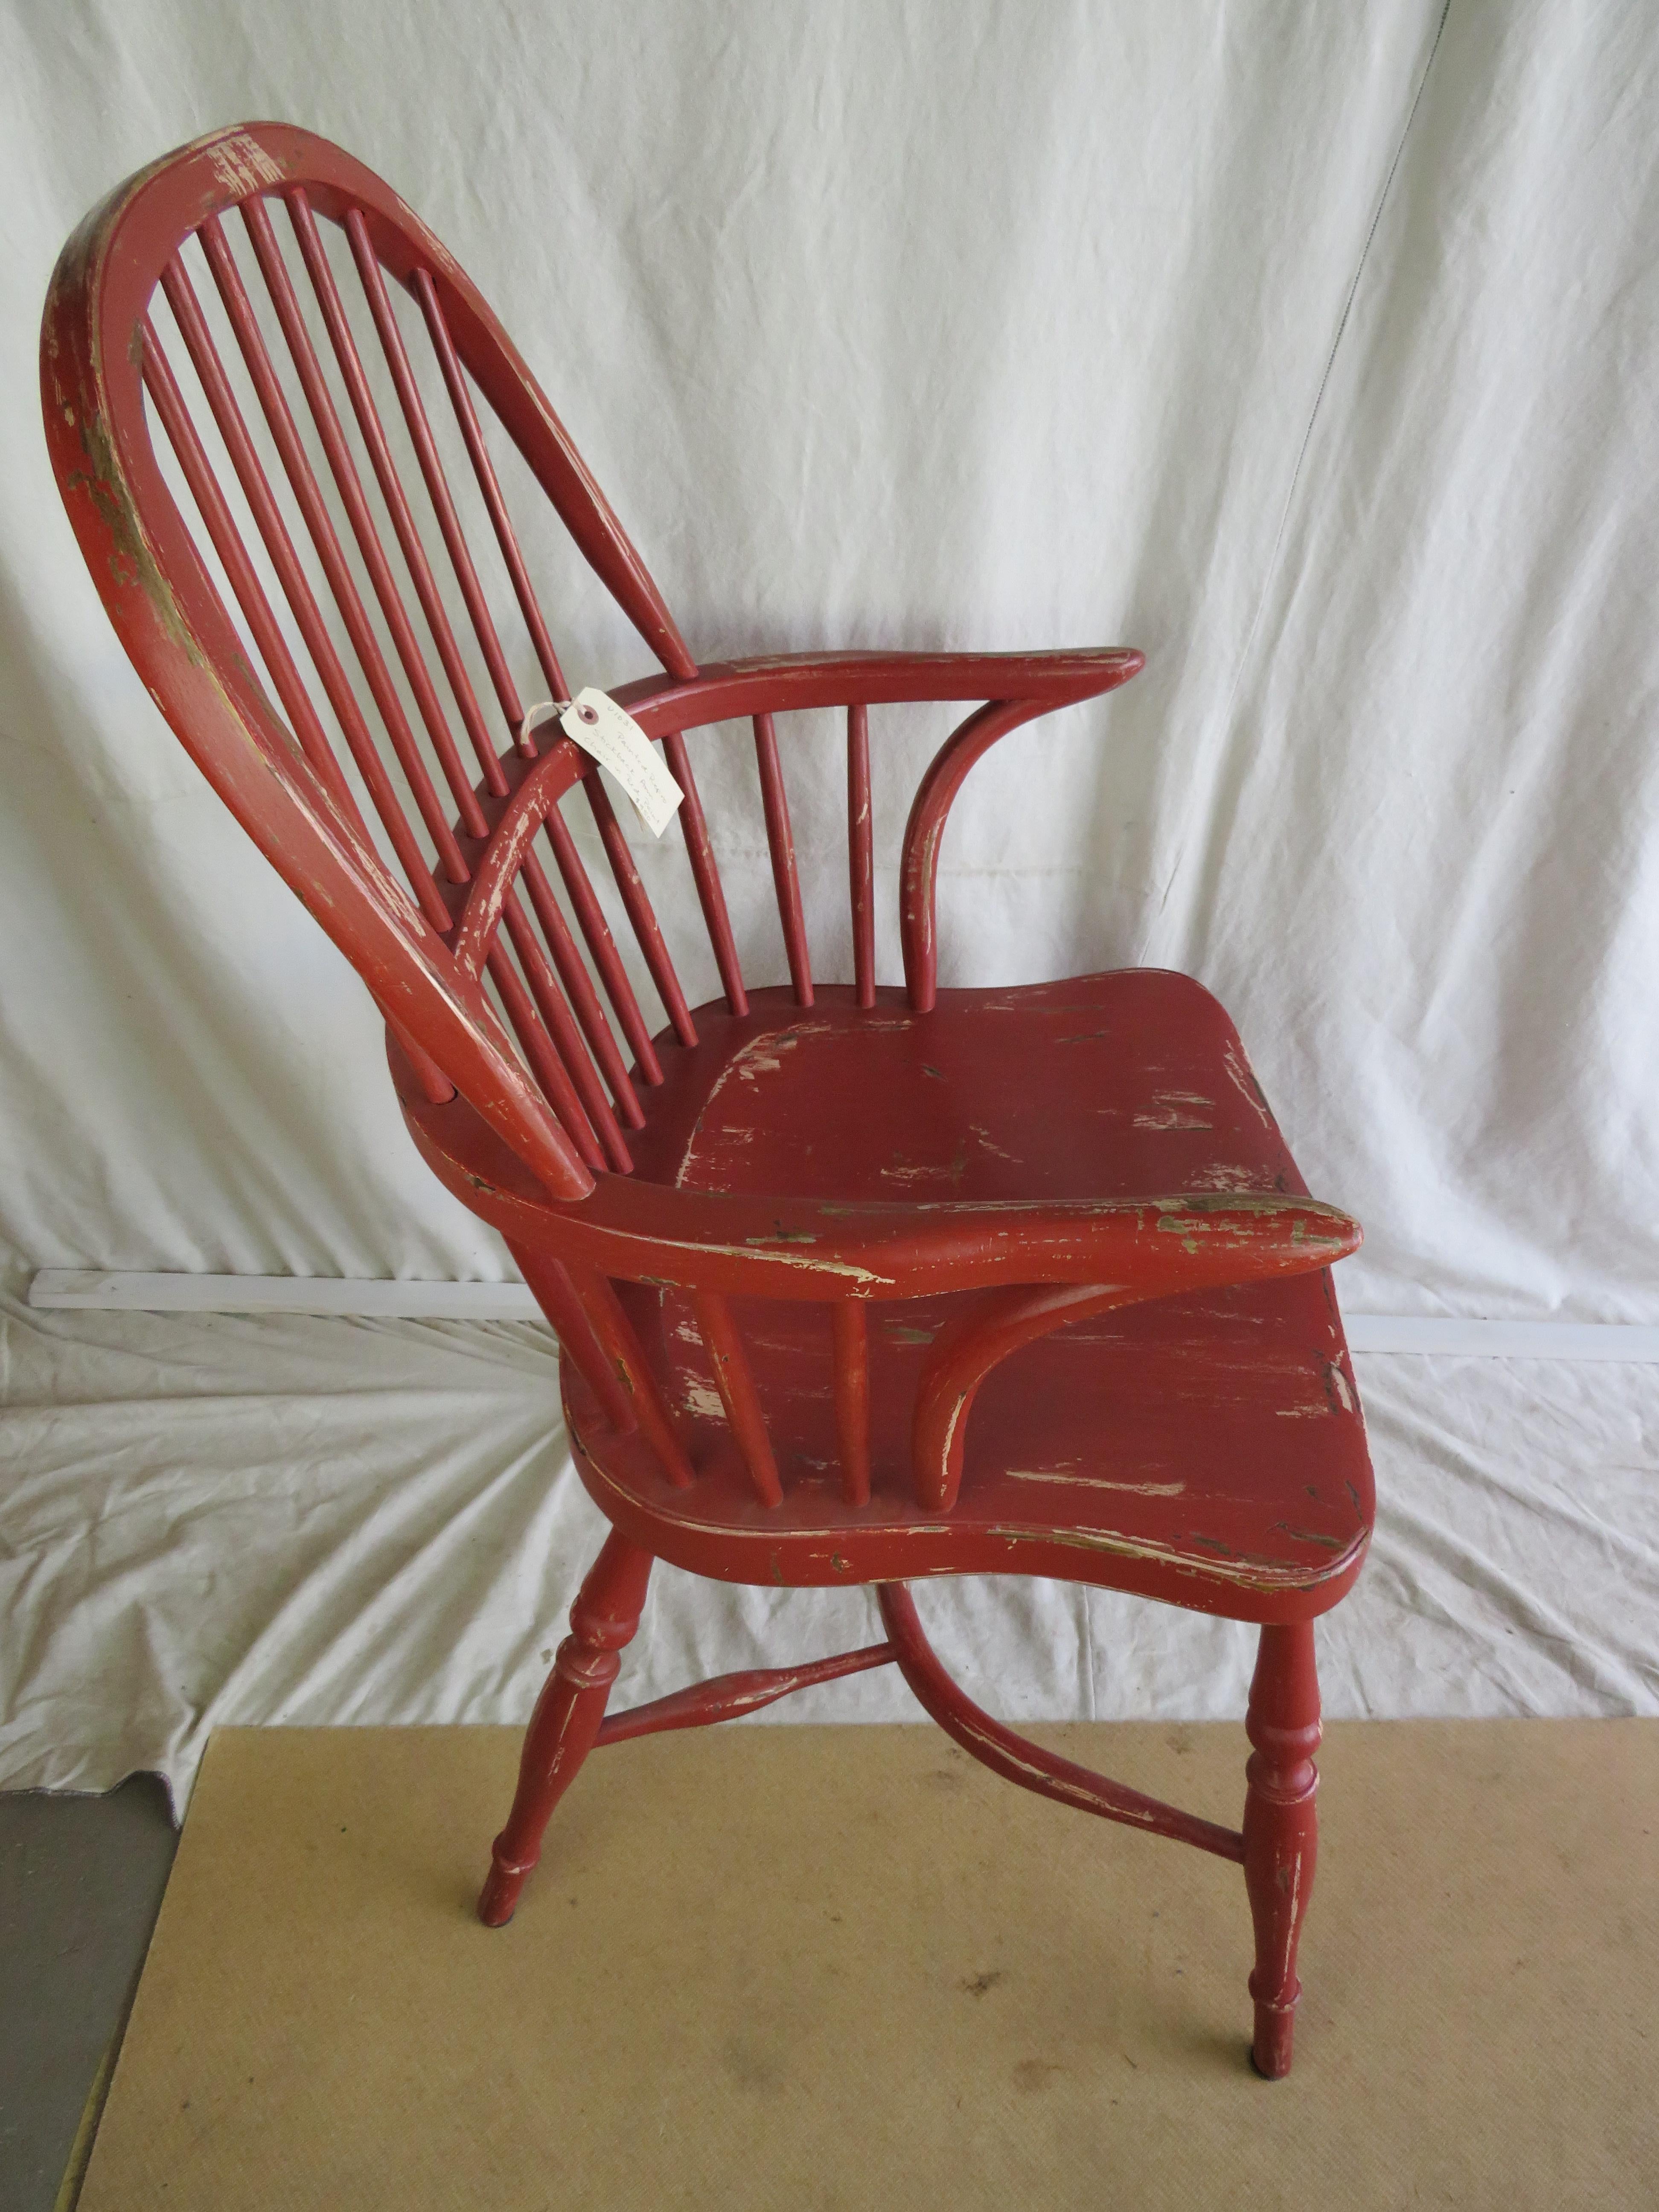 English Reproduction Stick Back Arm Chair in Red Paint In Good Condition For Sale In Nantucket, MA